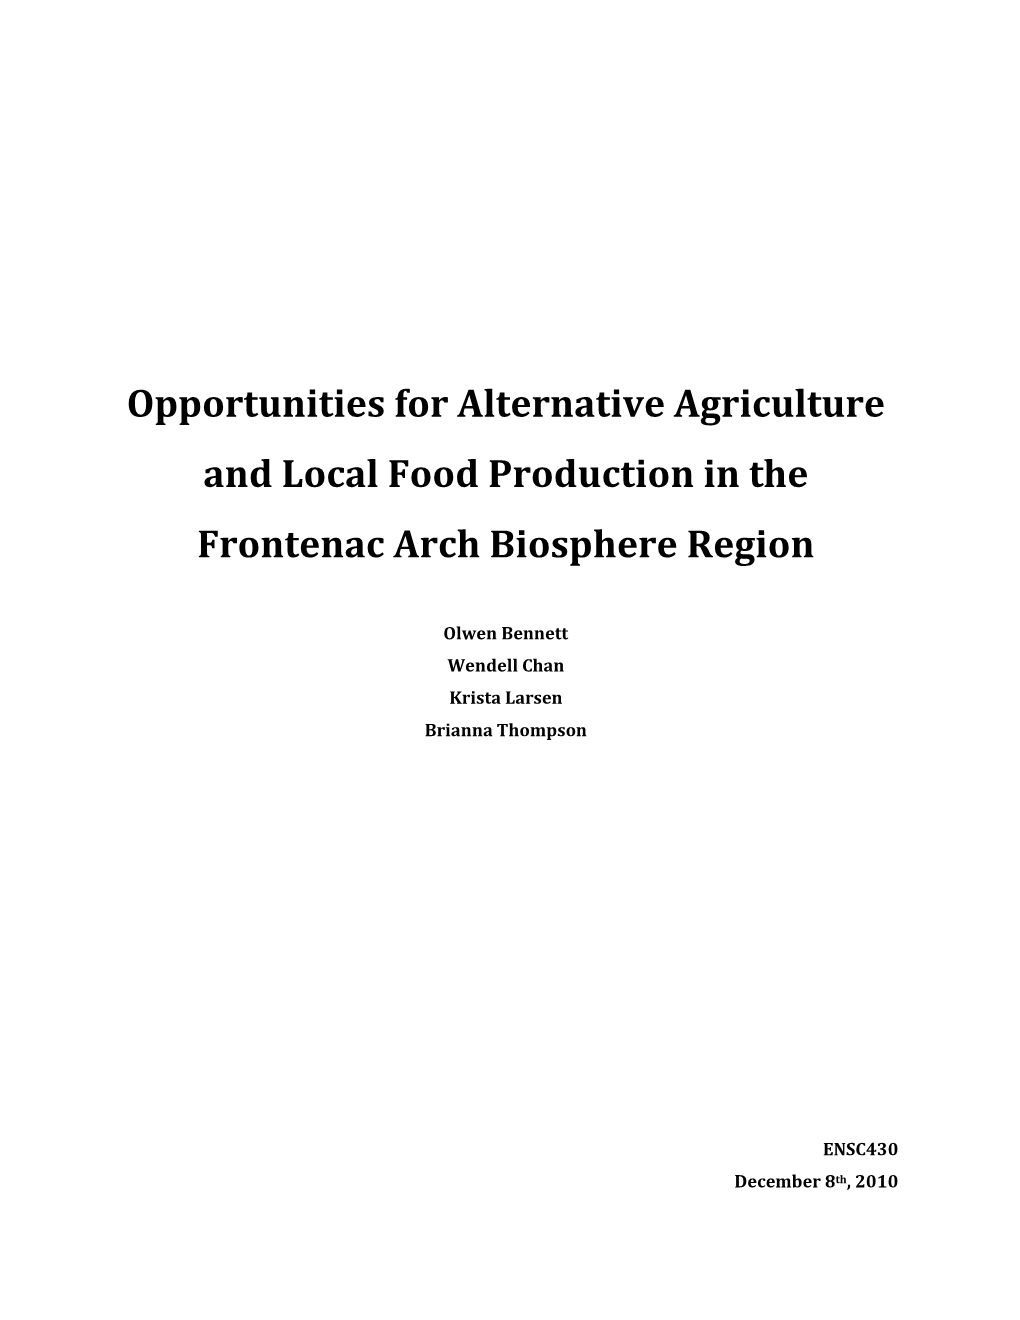 Agriculture and Food Indicators Group, 2009)